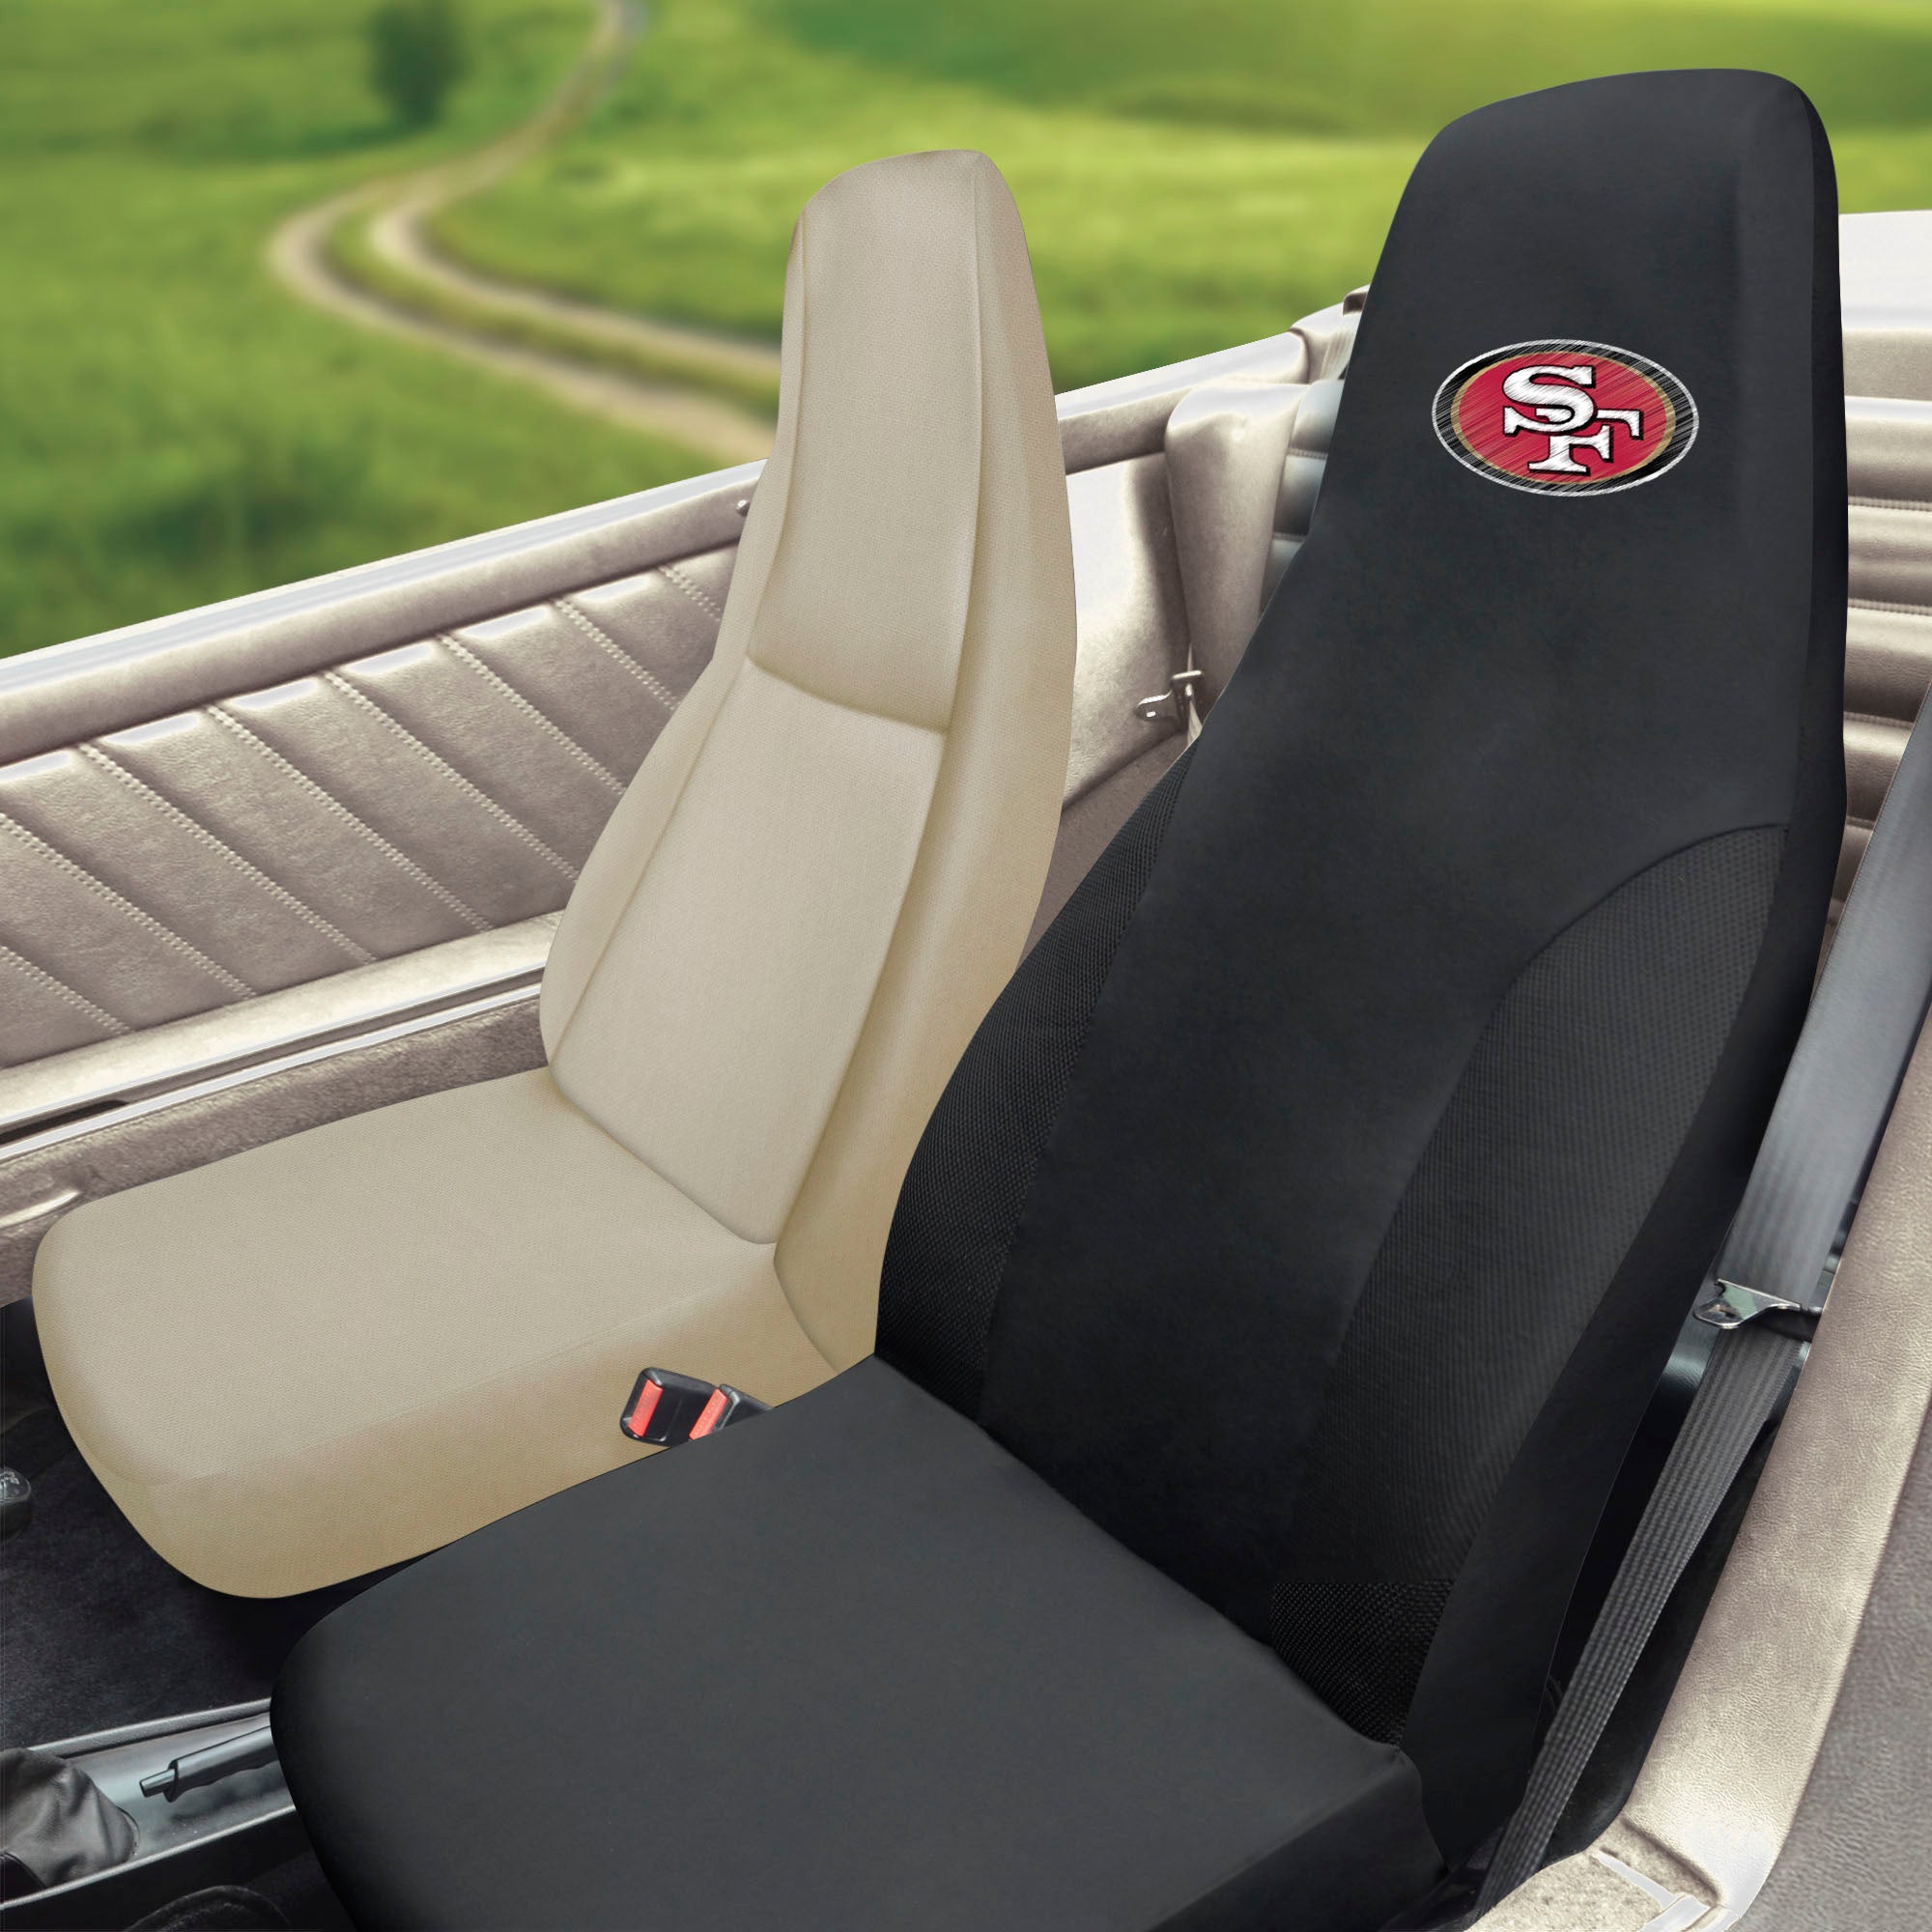 NFL - San Francisco 49ers Set of 2 Car Seat Covers